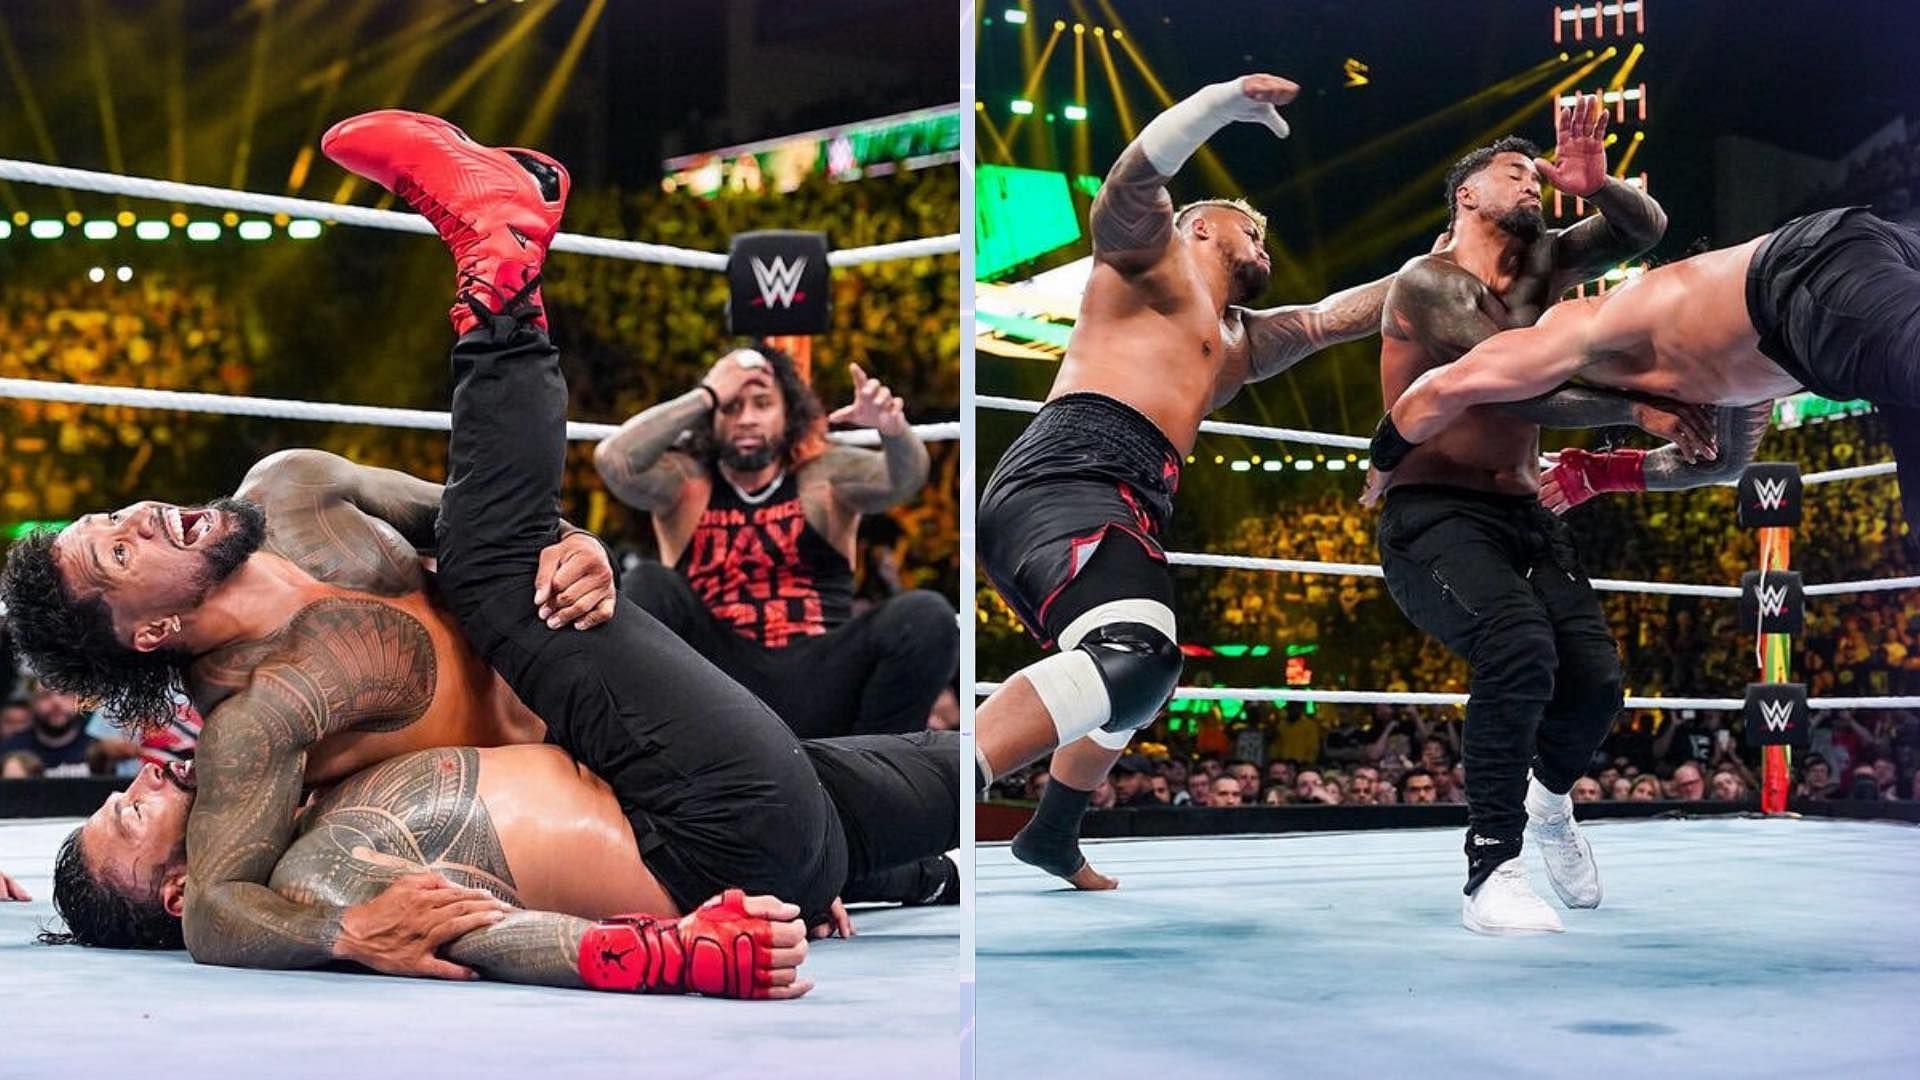 Bloodline Civil War was a great match at Money in the Bank